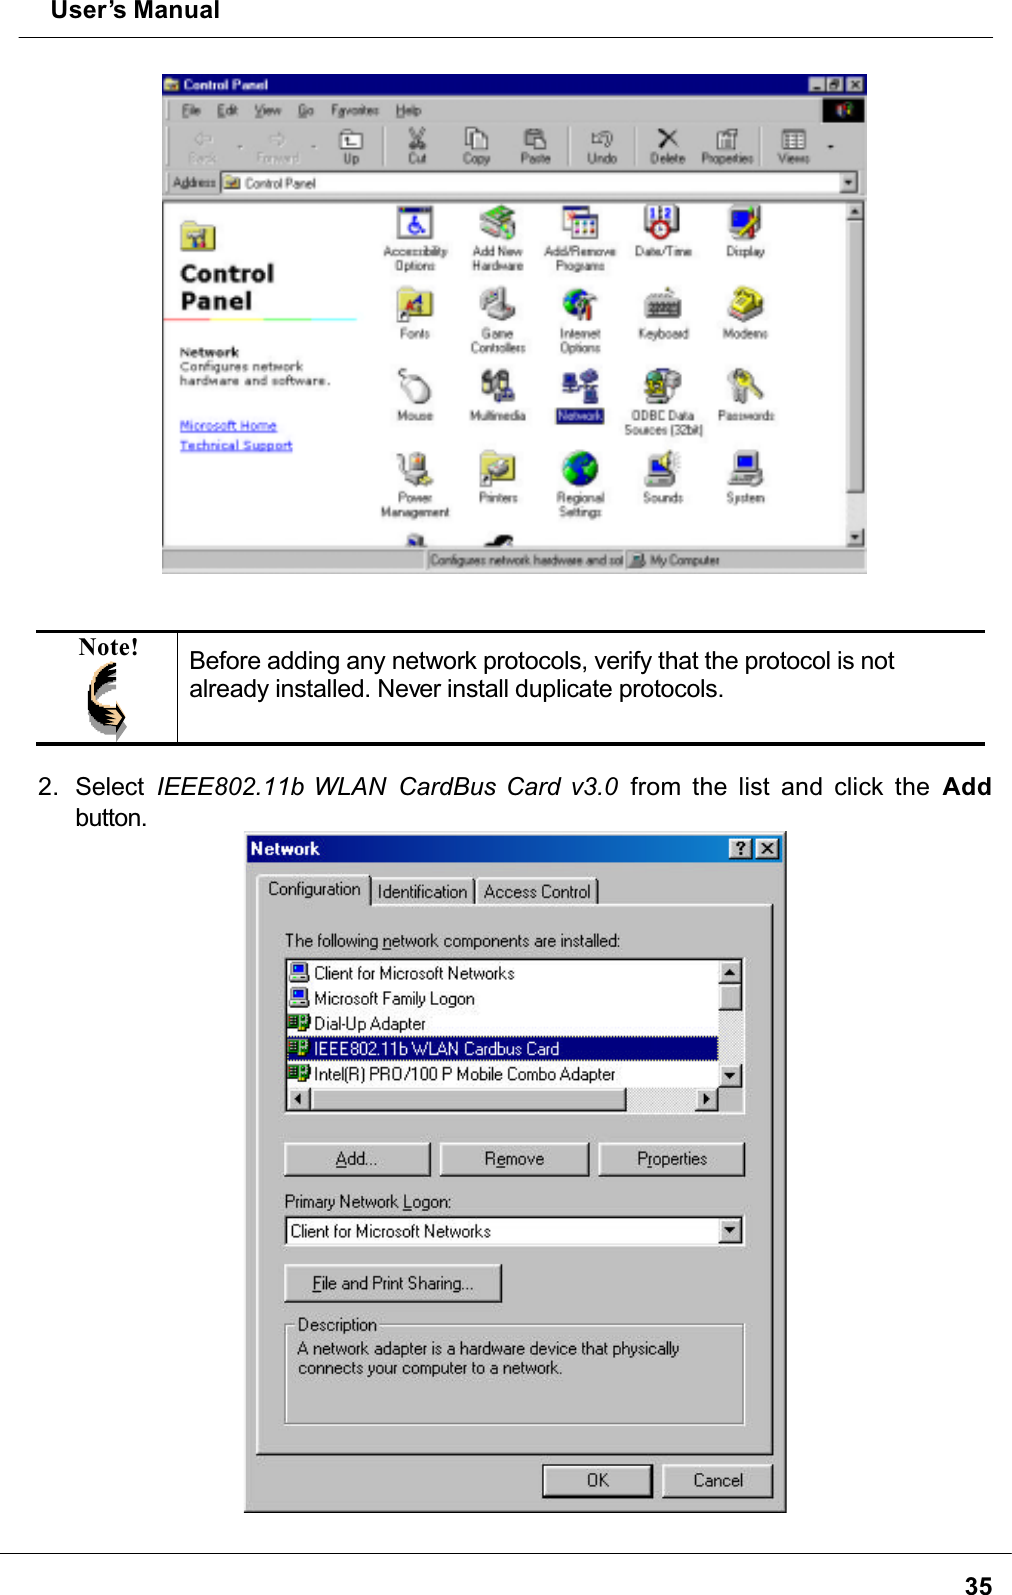  User’s Manual35Note! Before adding any network protocols, verify that the protocol is not already installed. Never install duplicate protocols.2. Select IEEE802.11b WLAN  CardBus Card v3.0  from the list and click the Addbutton.